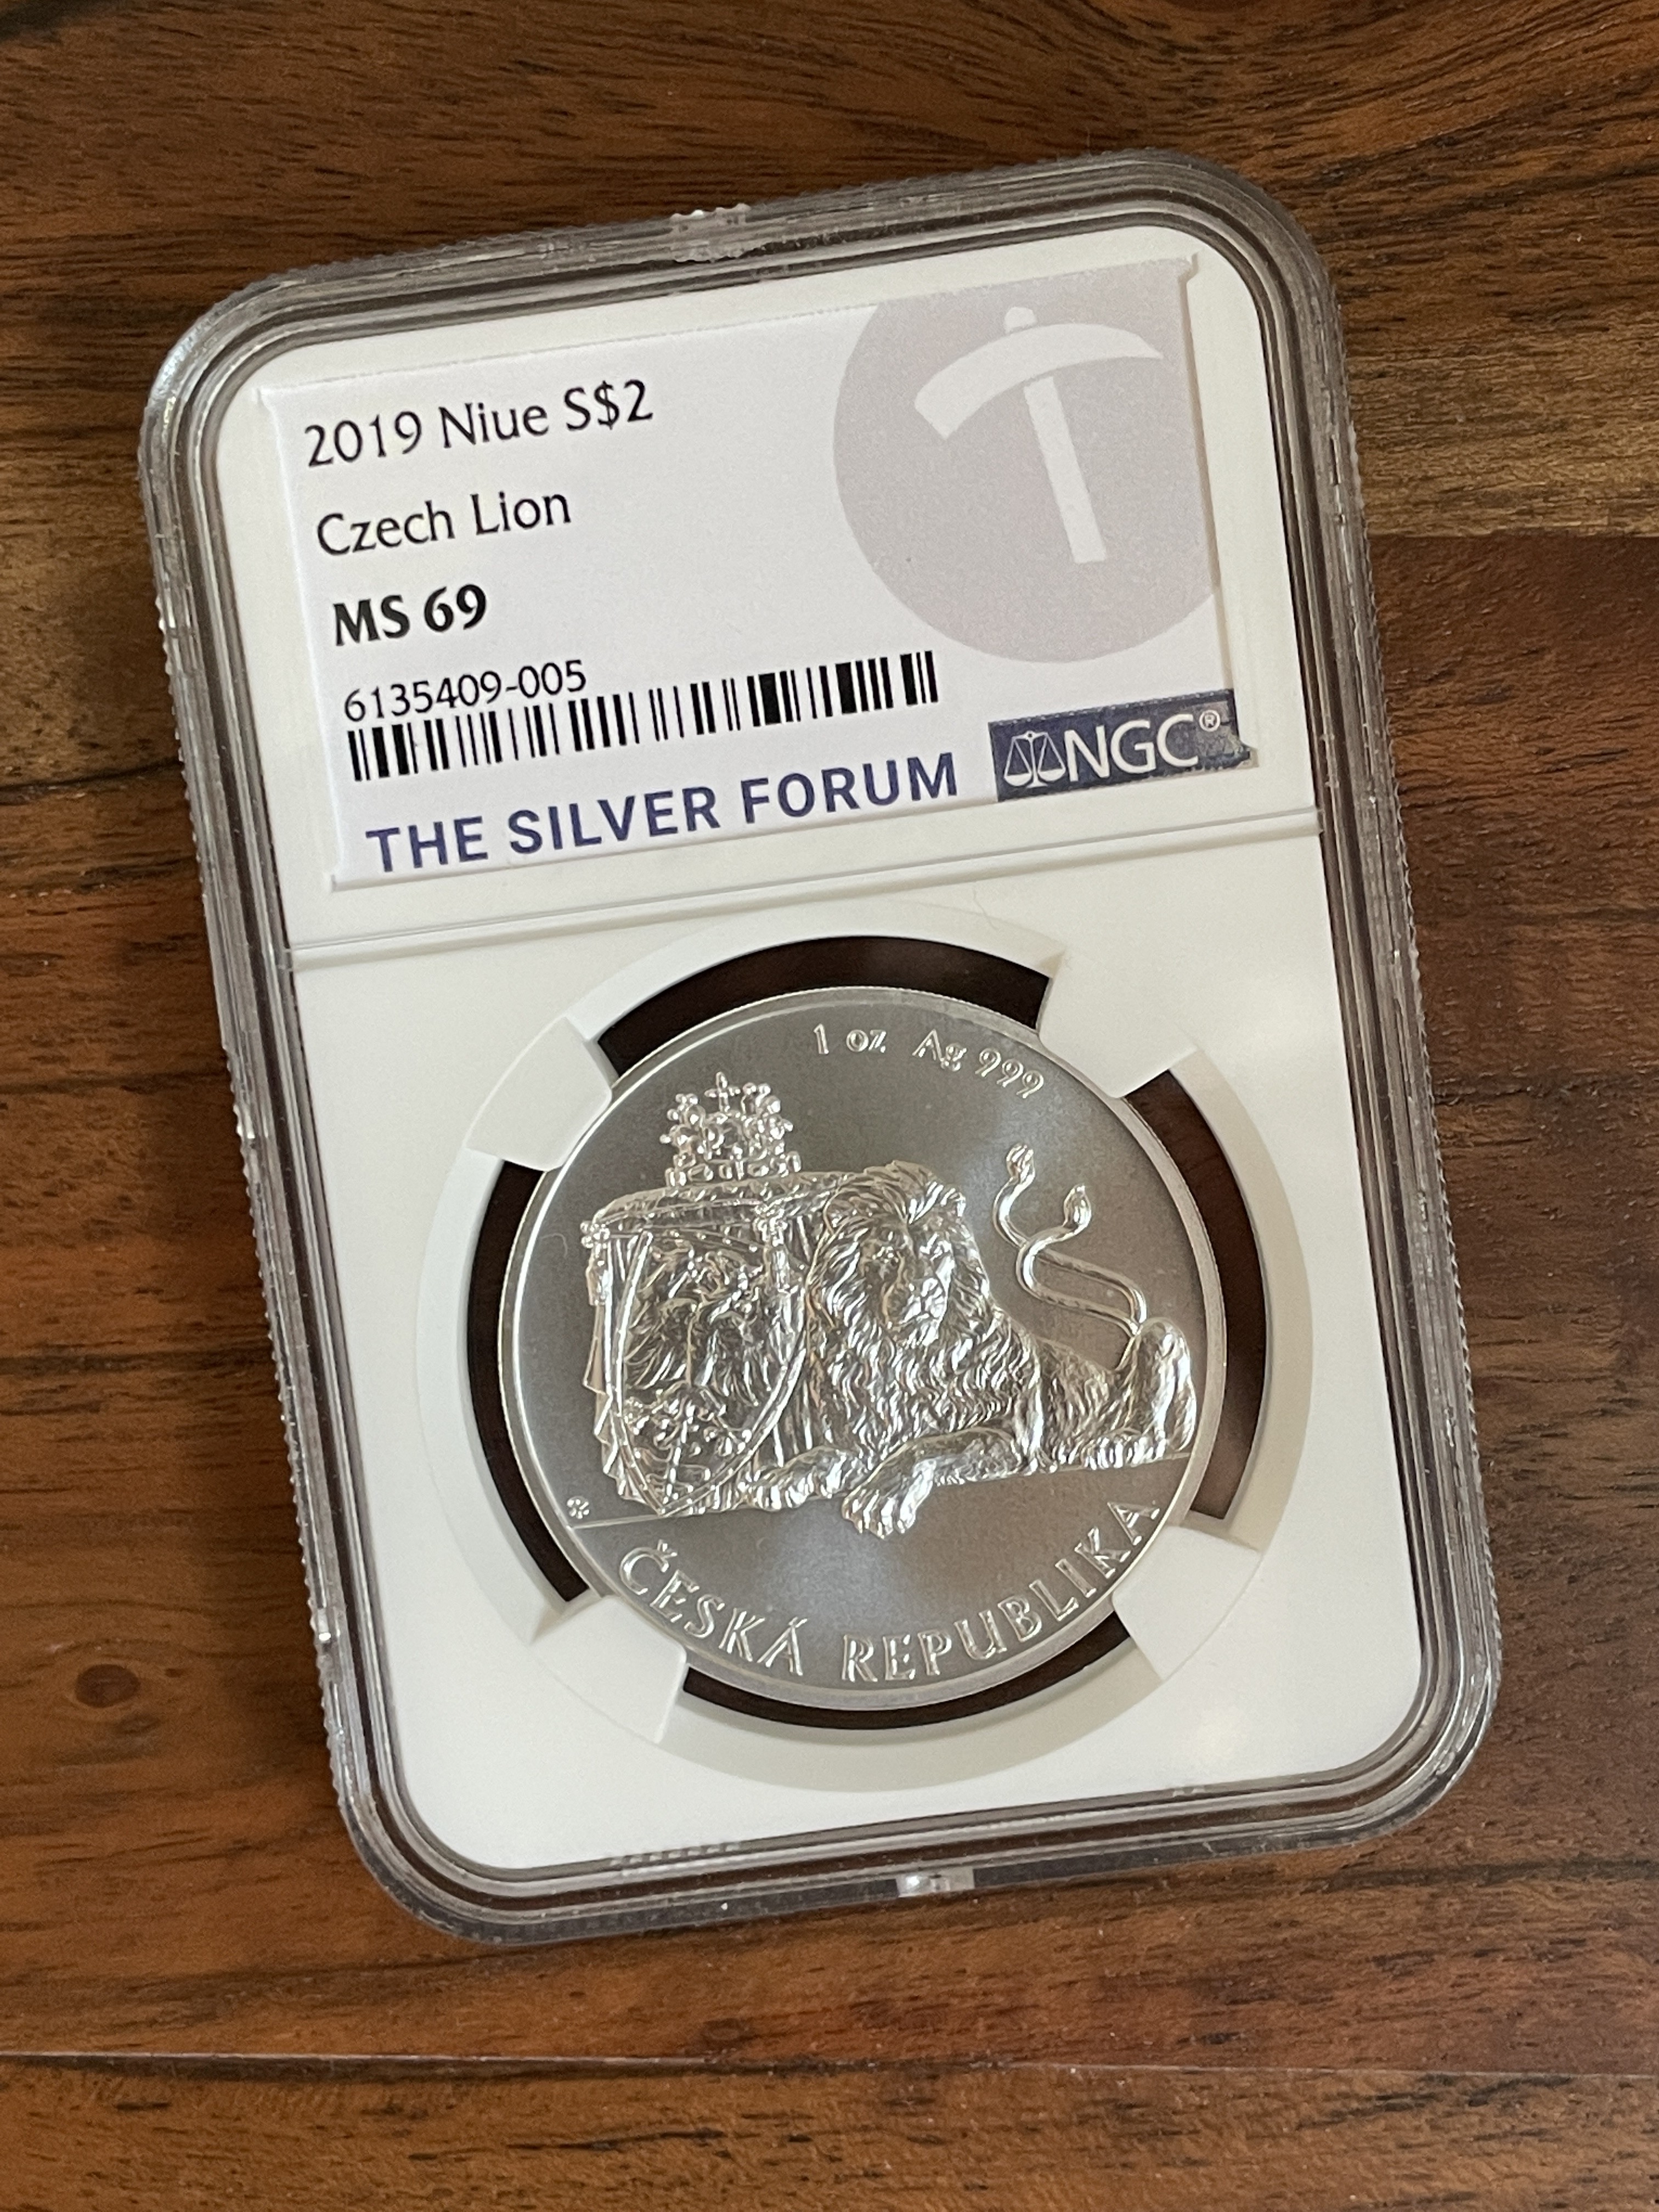 *All Members* Win a TSF branded label NGC 1oz MS69 Czech Lion